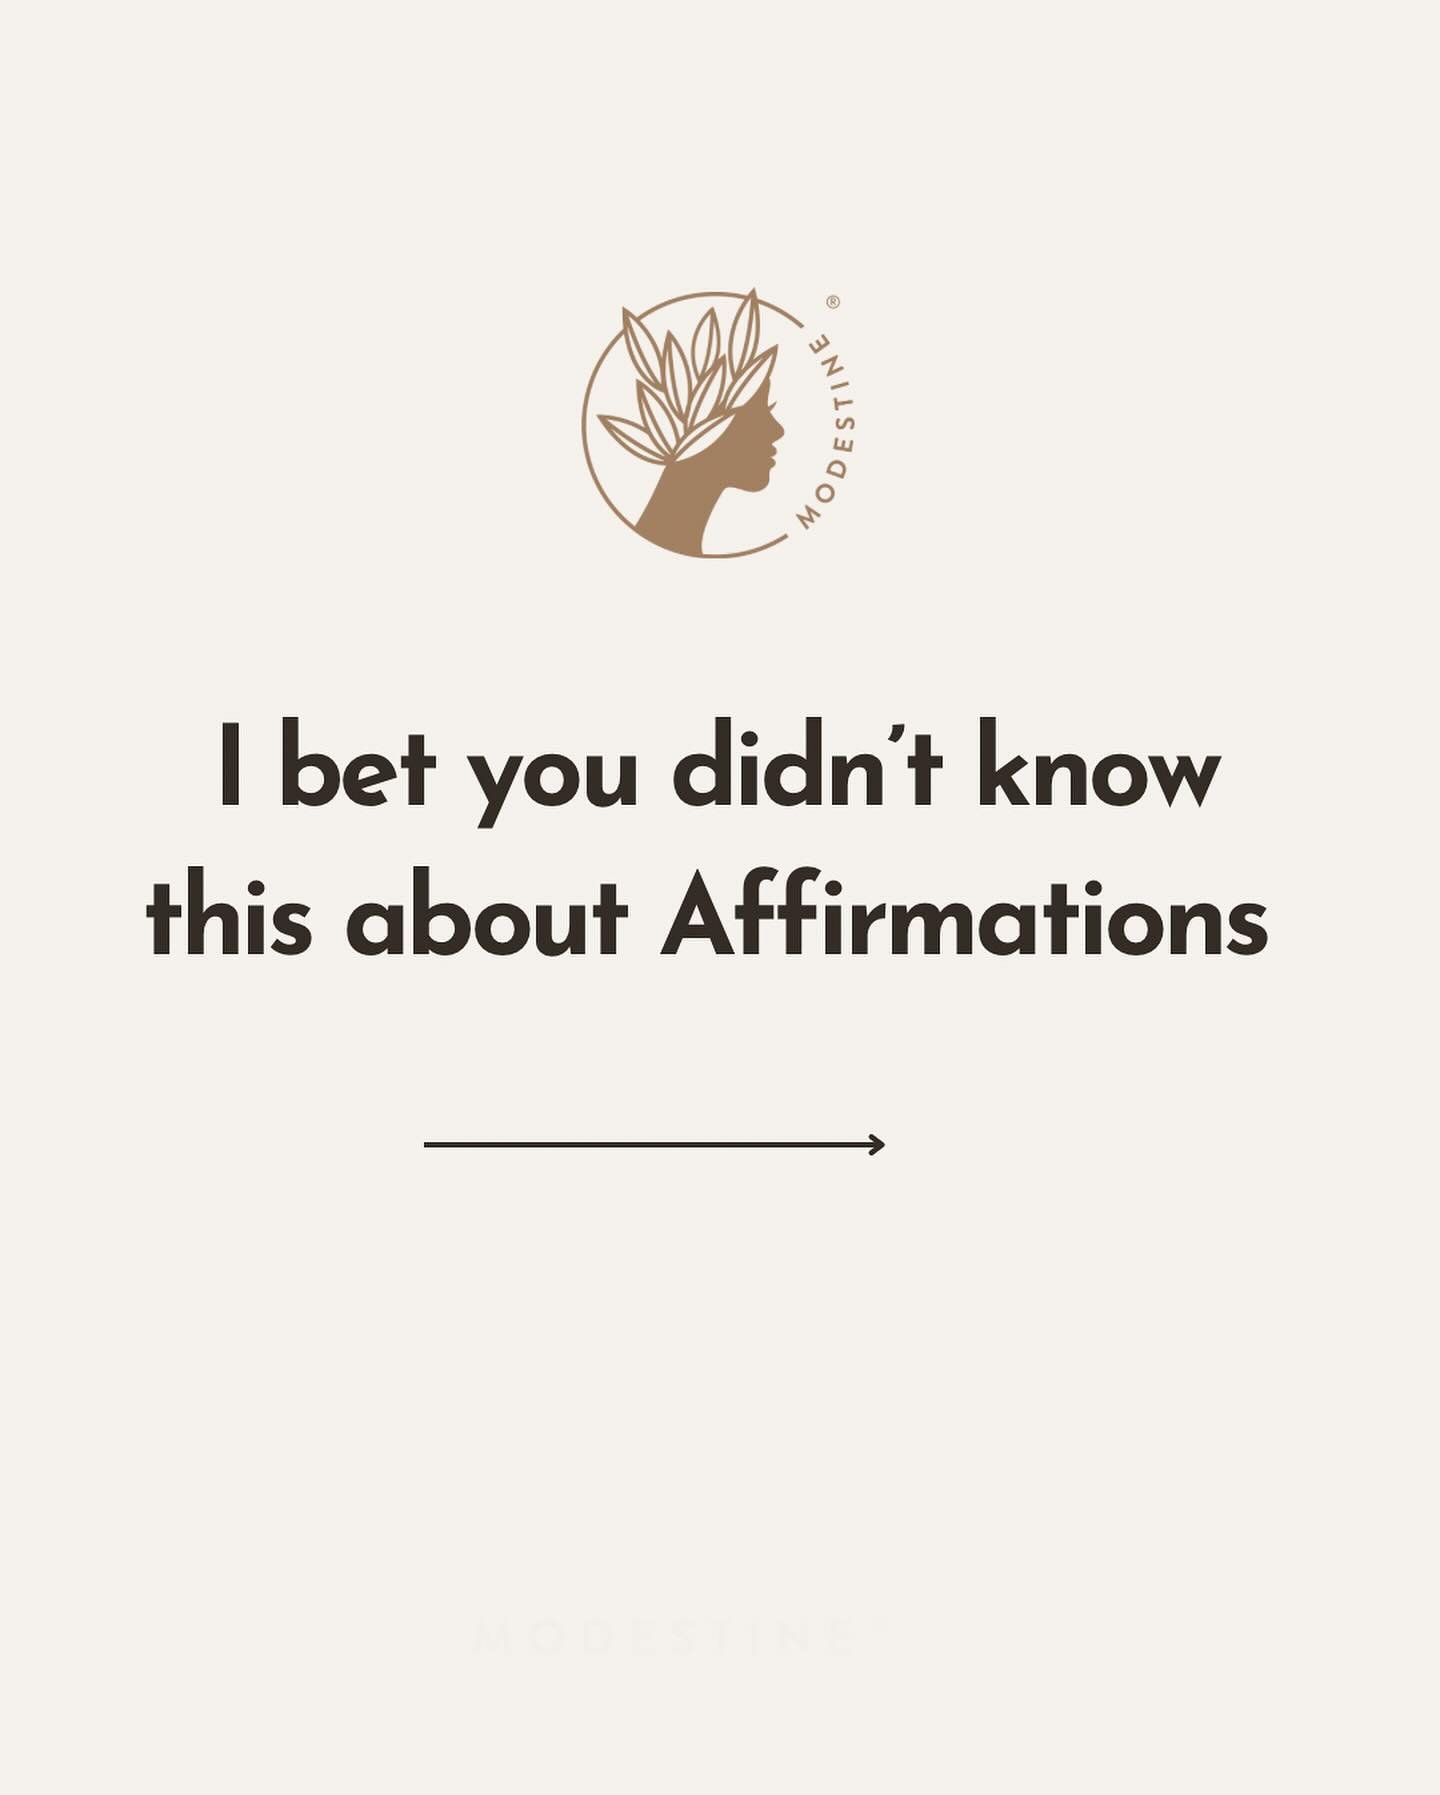 Are you tired of feeling like your affirmations are falling flat?&nbsp;

Let&rsquo;s revamp your practice by avoiding these common mistakes:&nbsp;
Saying &lsquo;I will&rsquo; instead of &lsquo;I am,&rsquo; focusing on negatives, and making vague, gen